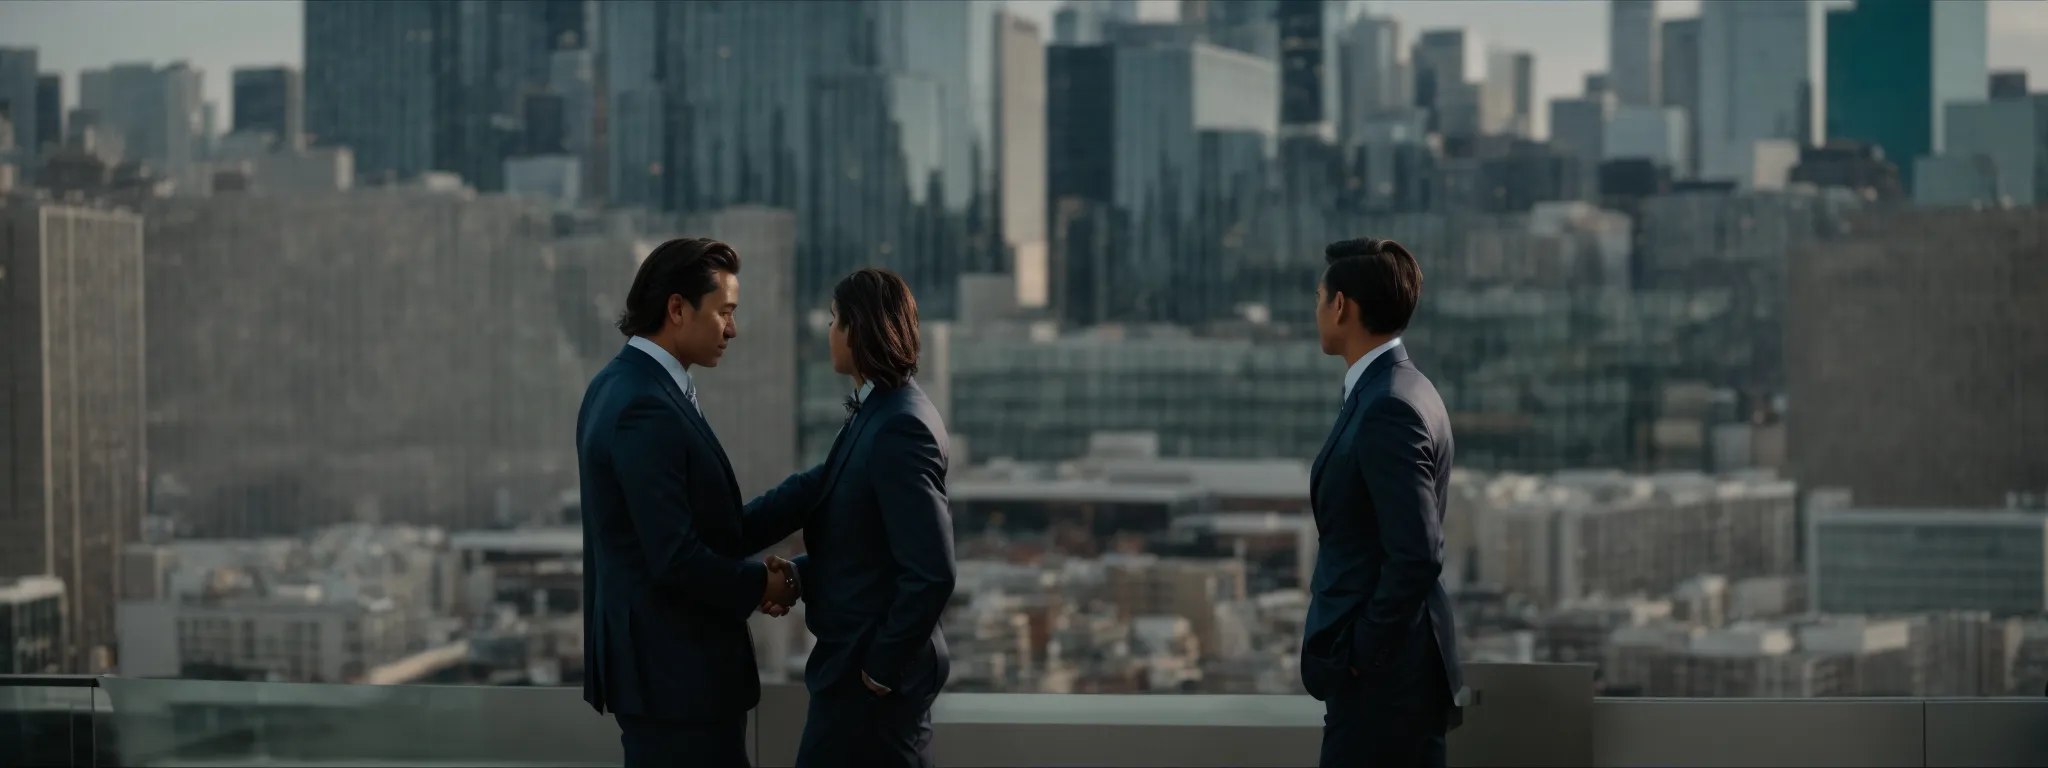 a professional handshake between two executives against the backdrop of high-rise corporate buildings.